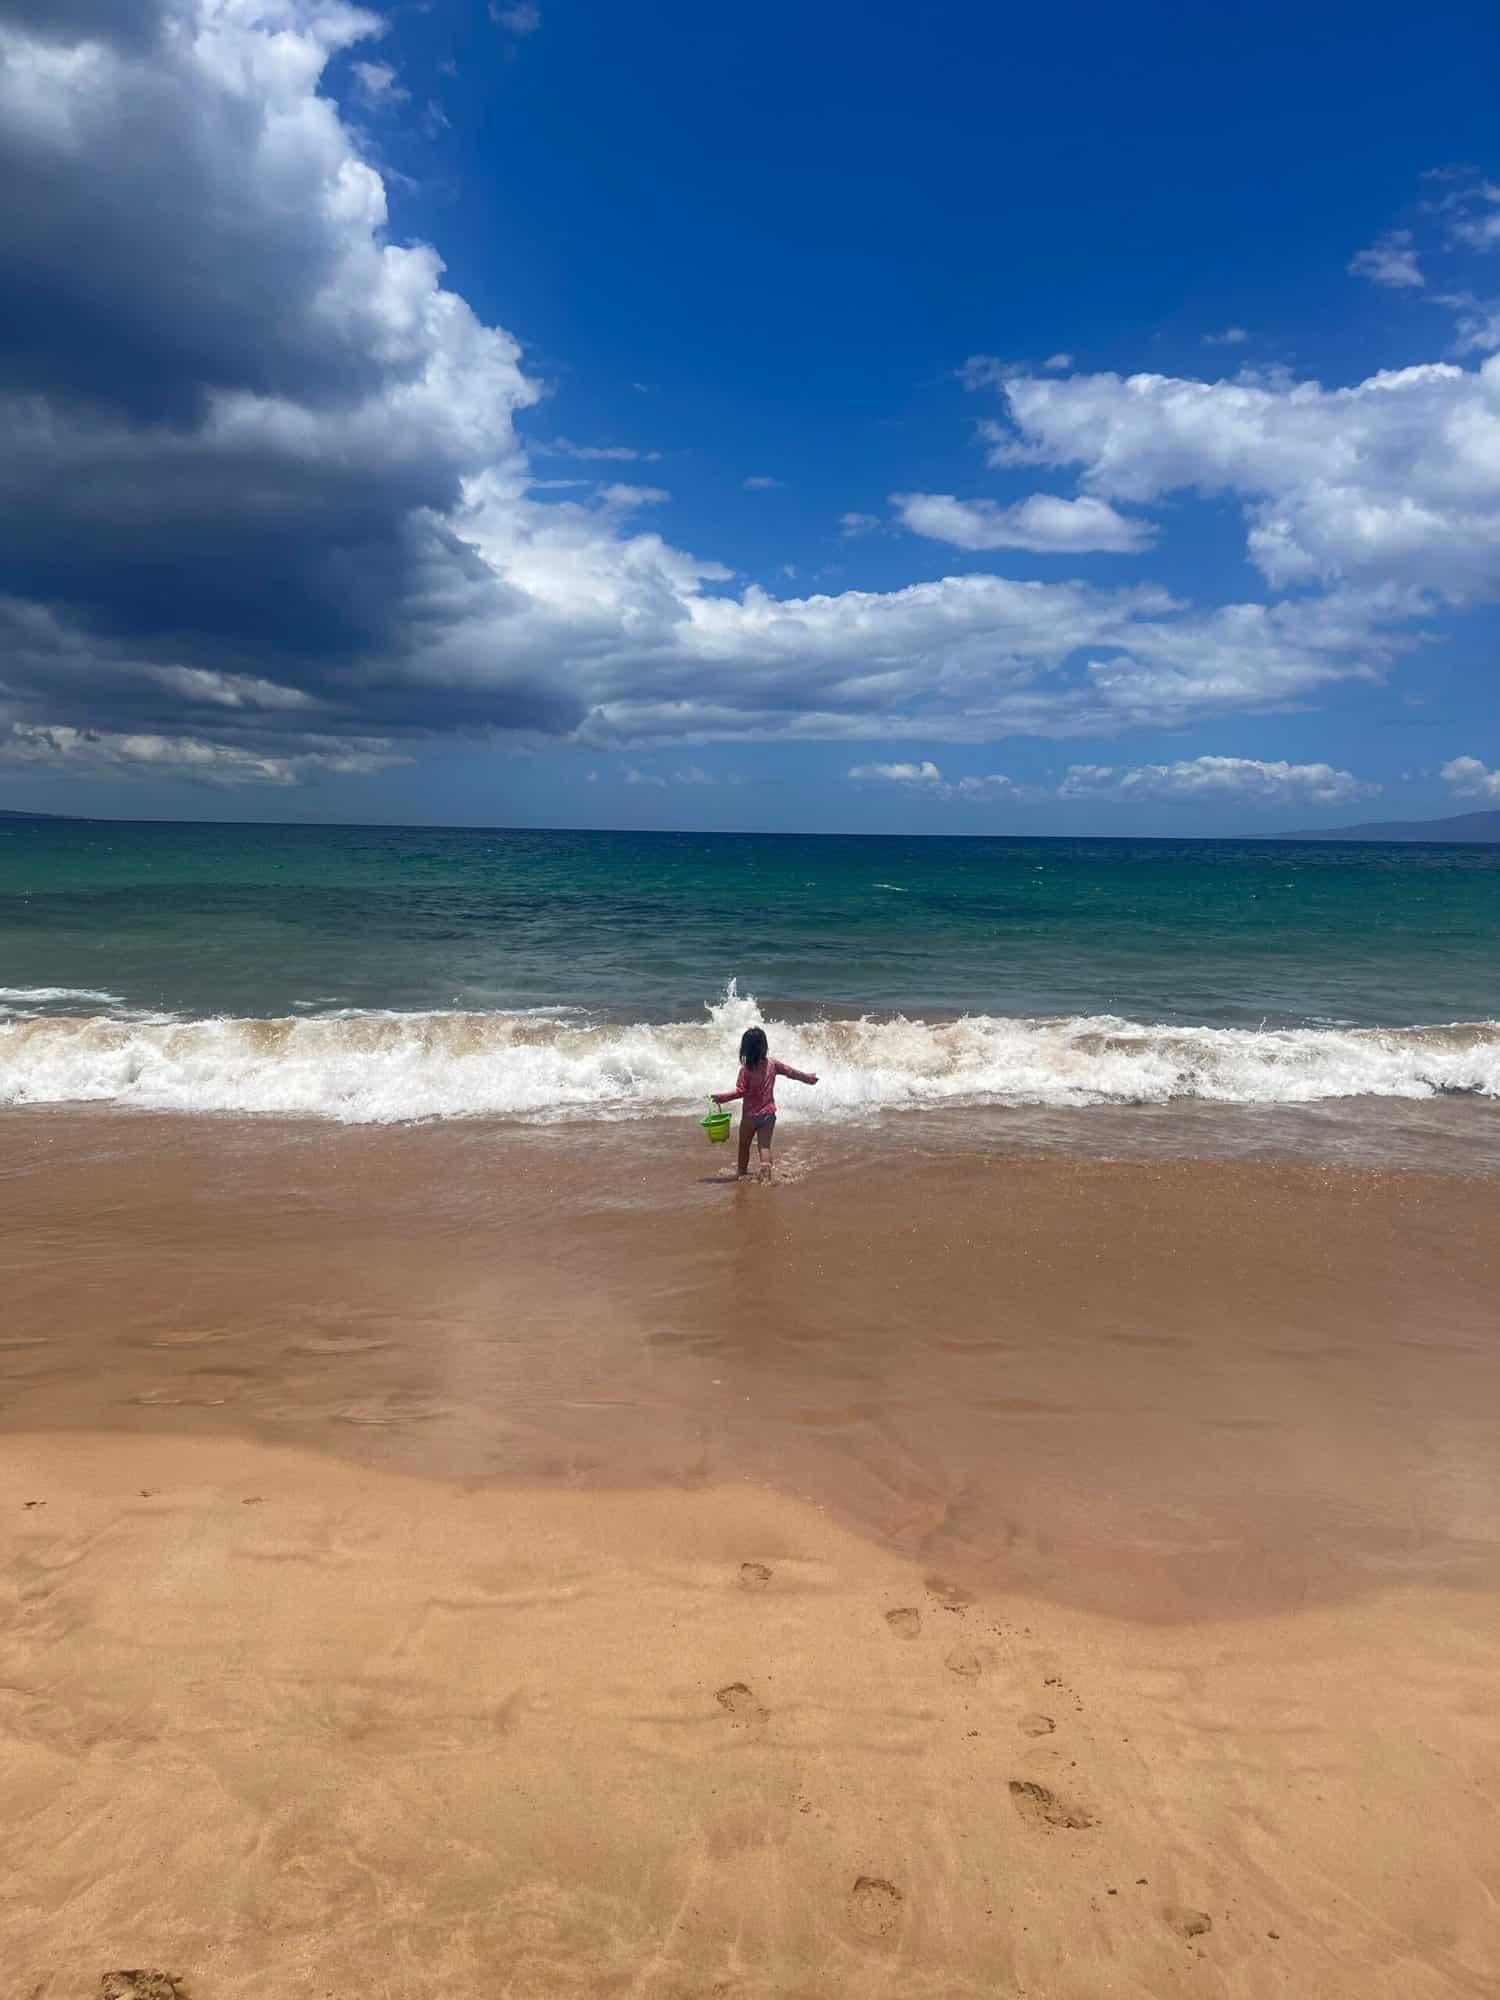 Child on a beach heading into the waves.